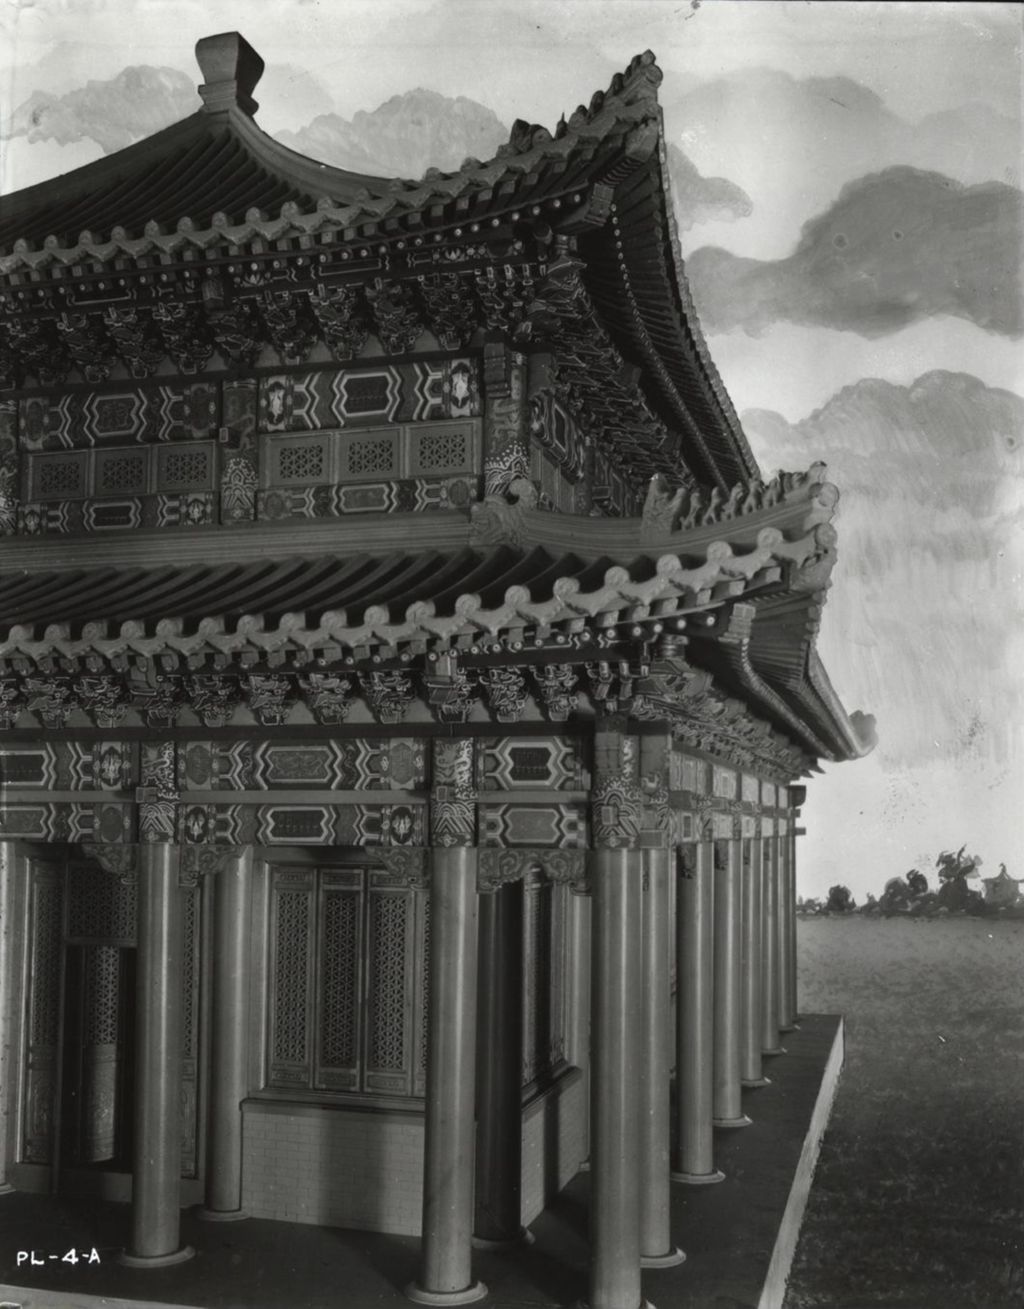 Miniature of Photo of the Lama Temple exhibit under construction at A Century of Progress.